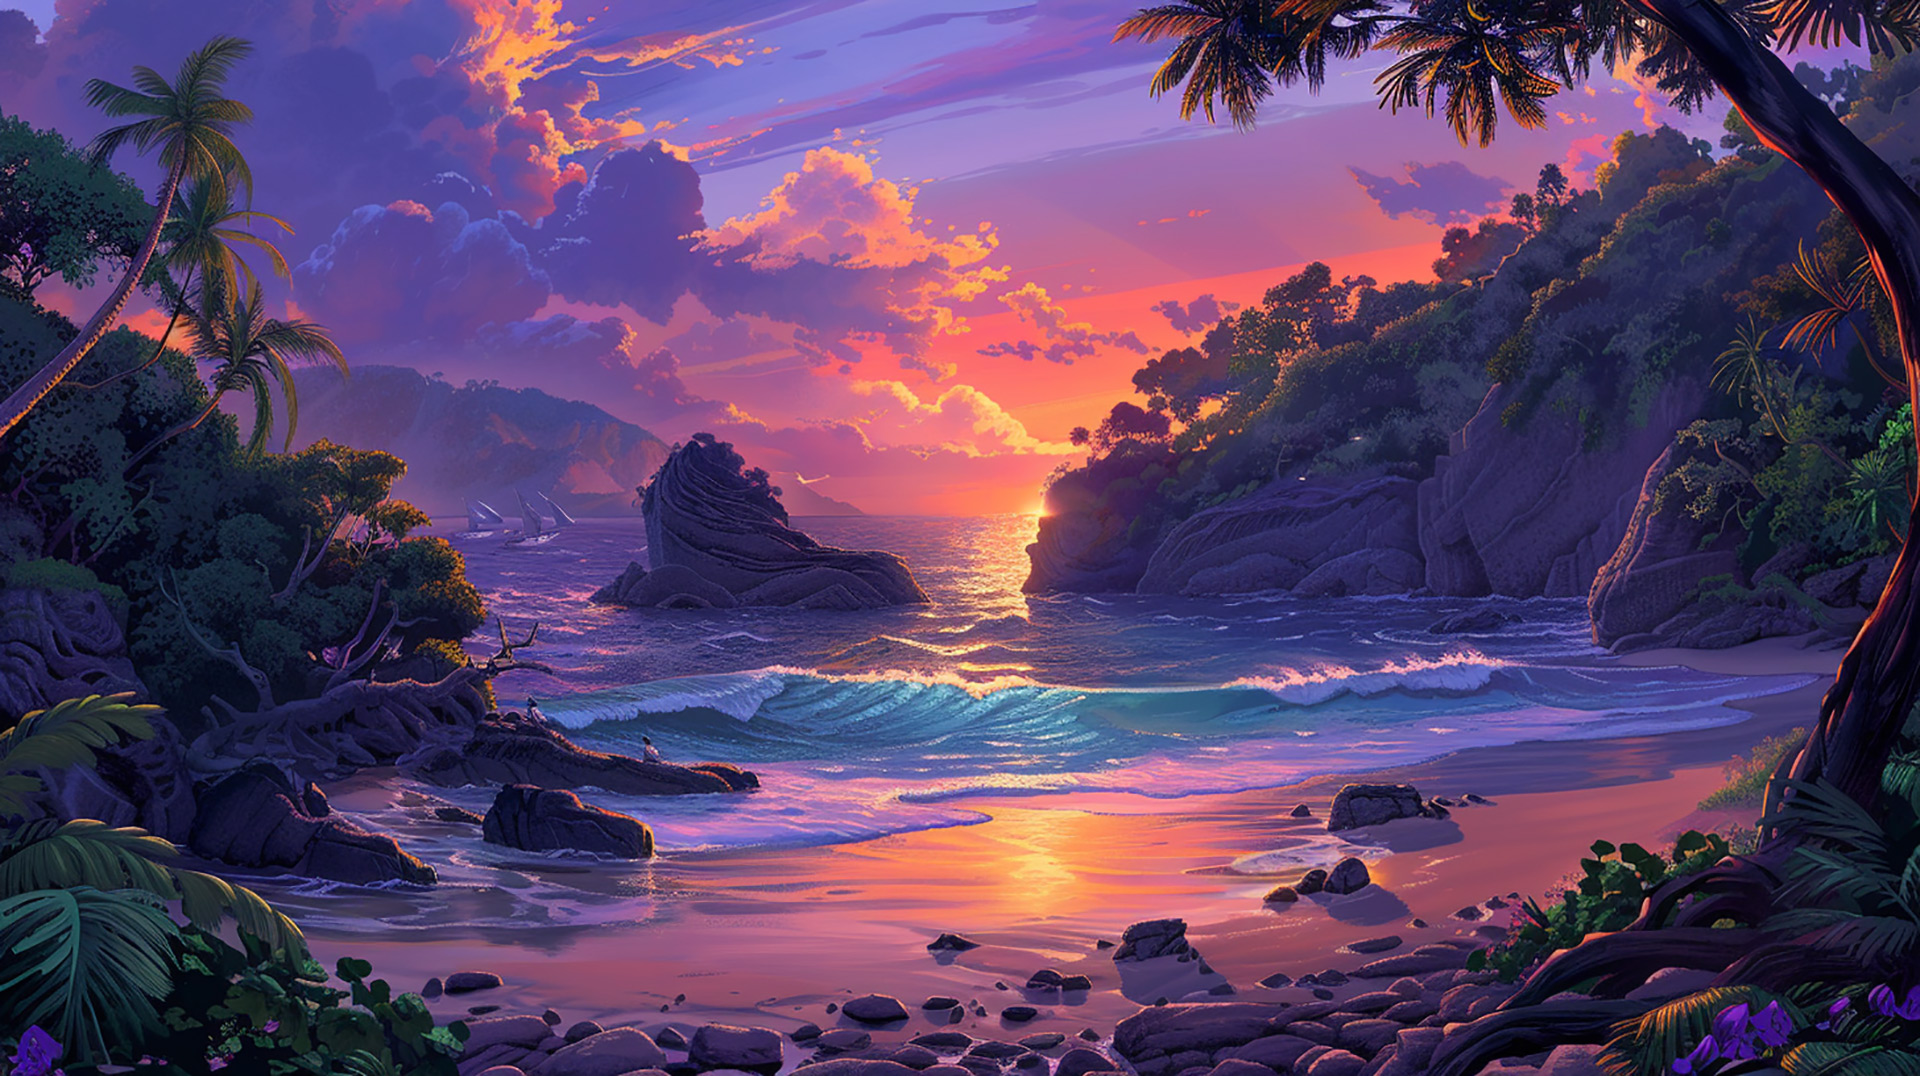 Sunkissed Shores: Tropical Beach Sunset Delight